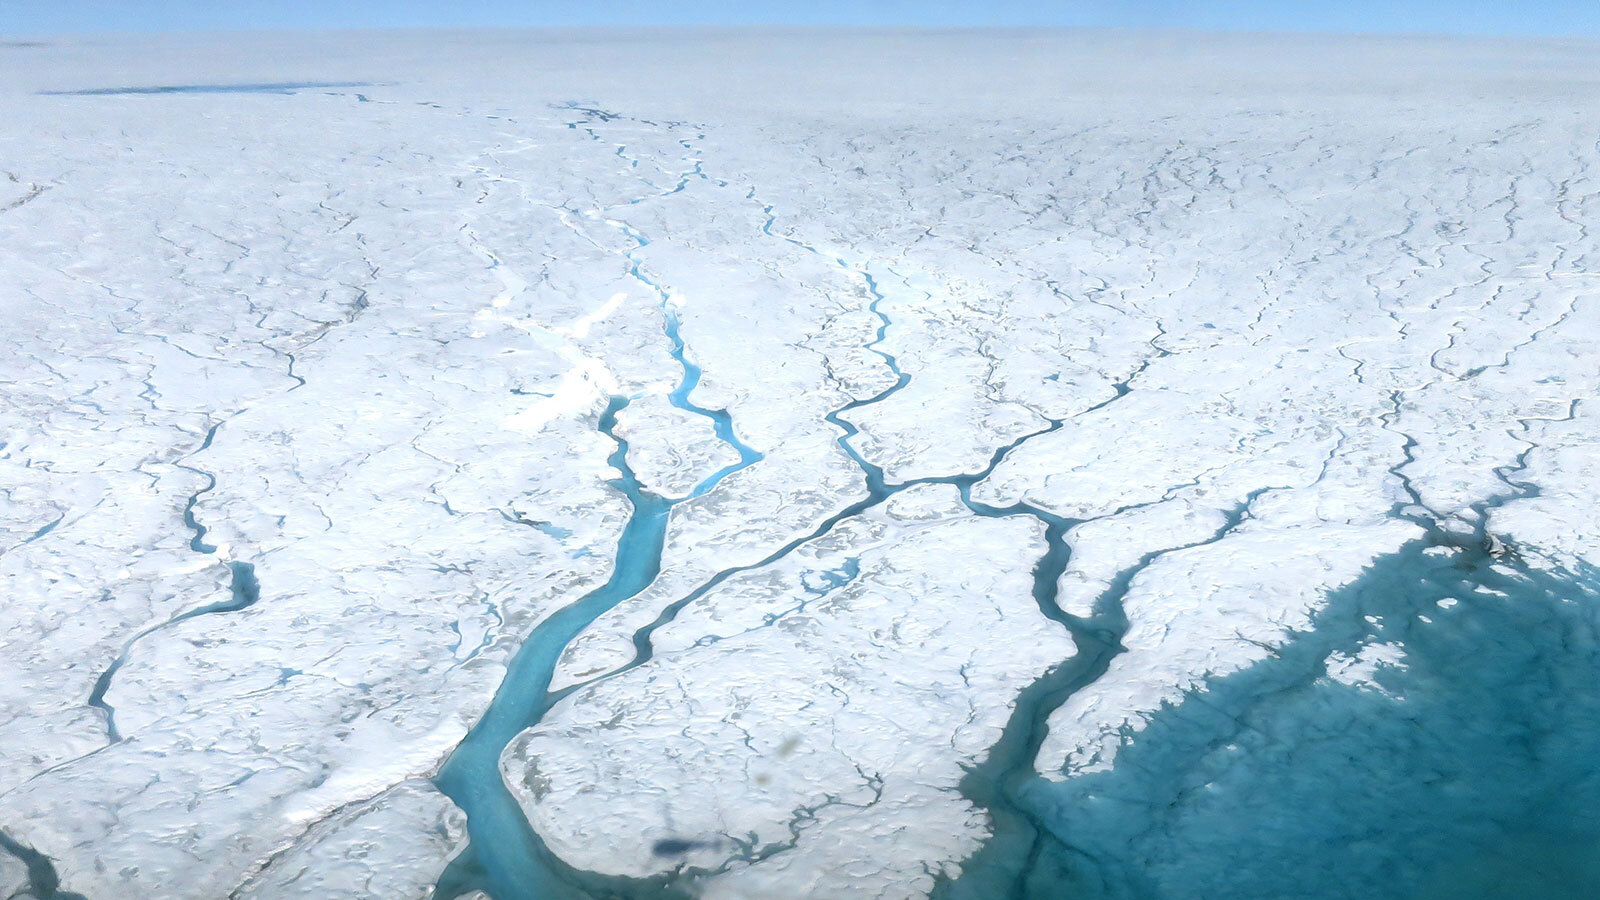 A photo of meltwater rivers flowing across the Greenland Ice sheet, where the rivers branch out over the ice.